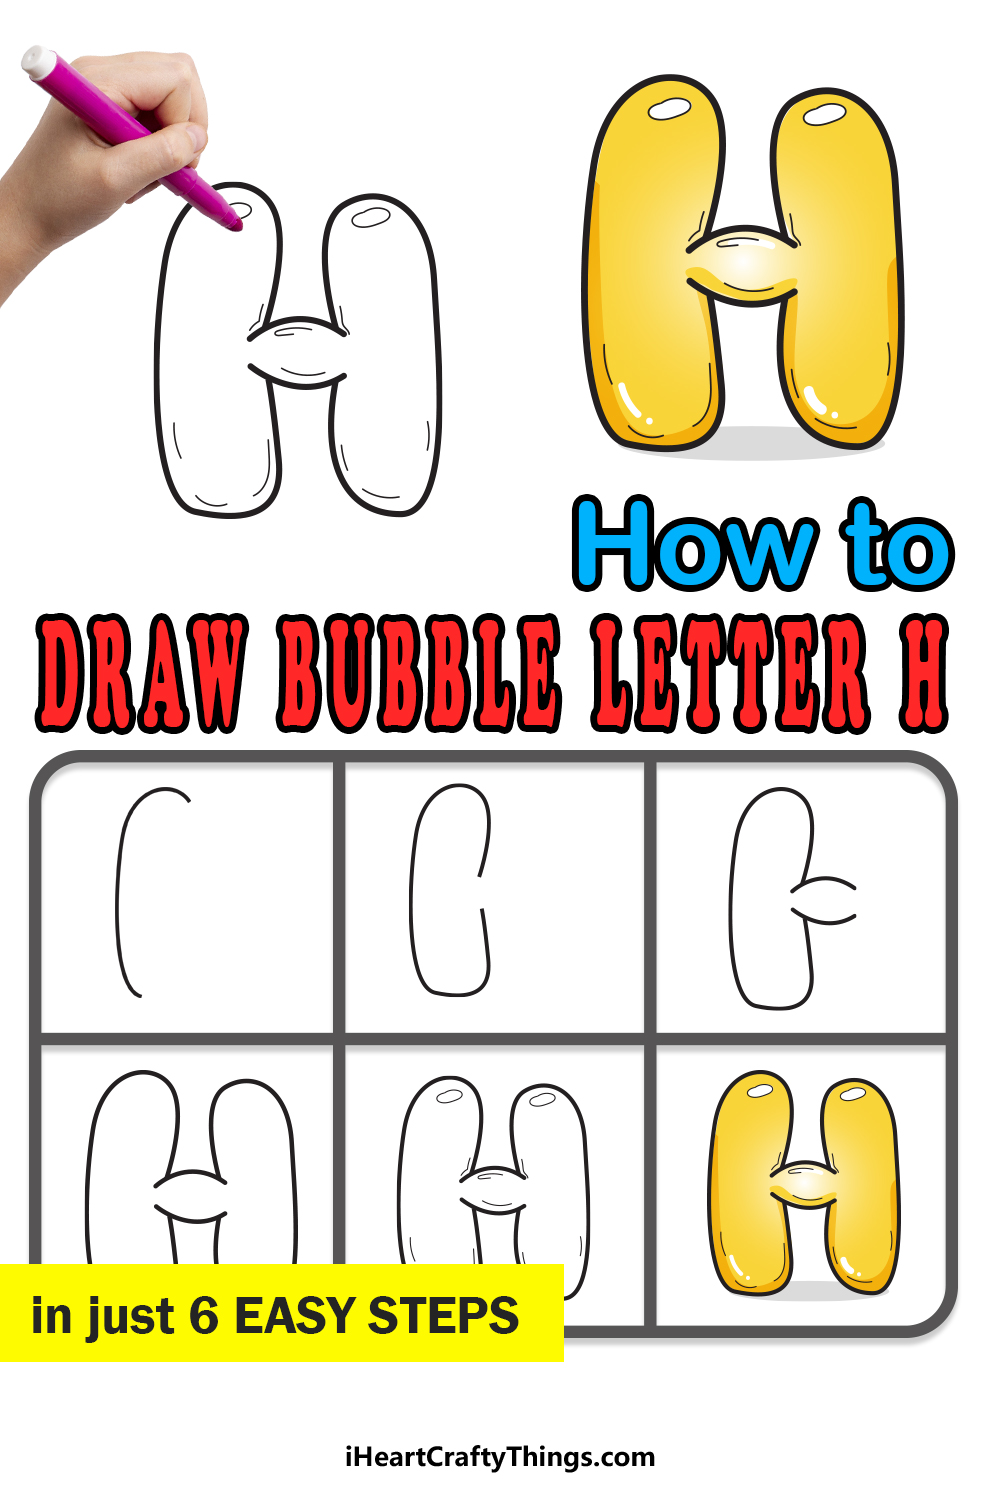 How To Draw Your Own Bubble H step by step guide